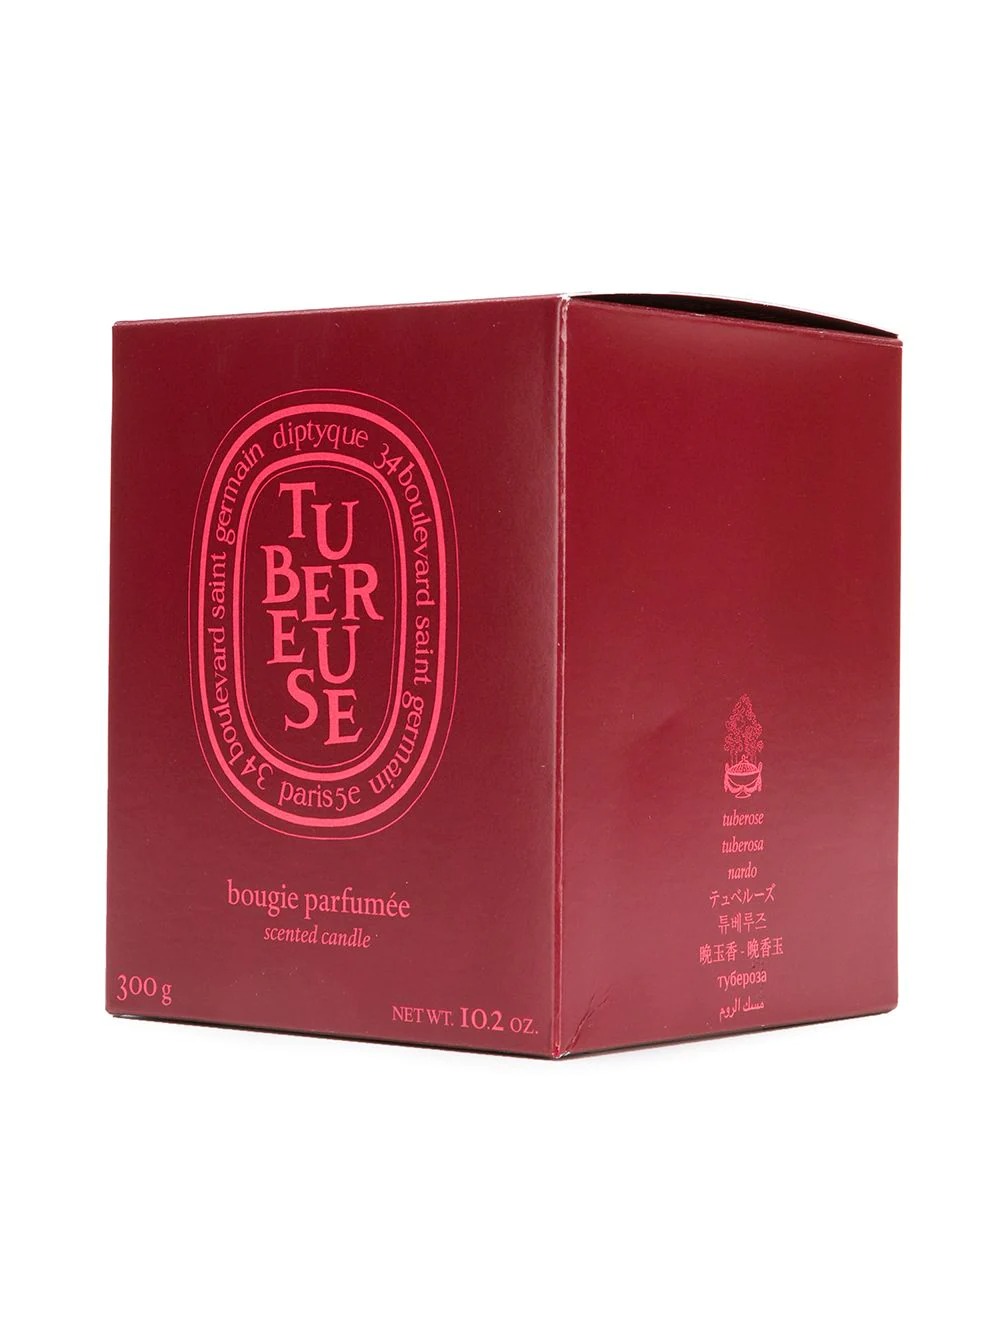 Diptyque Tubereuse candle1